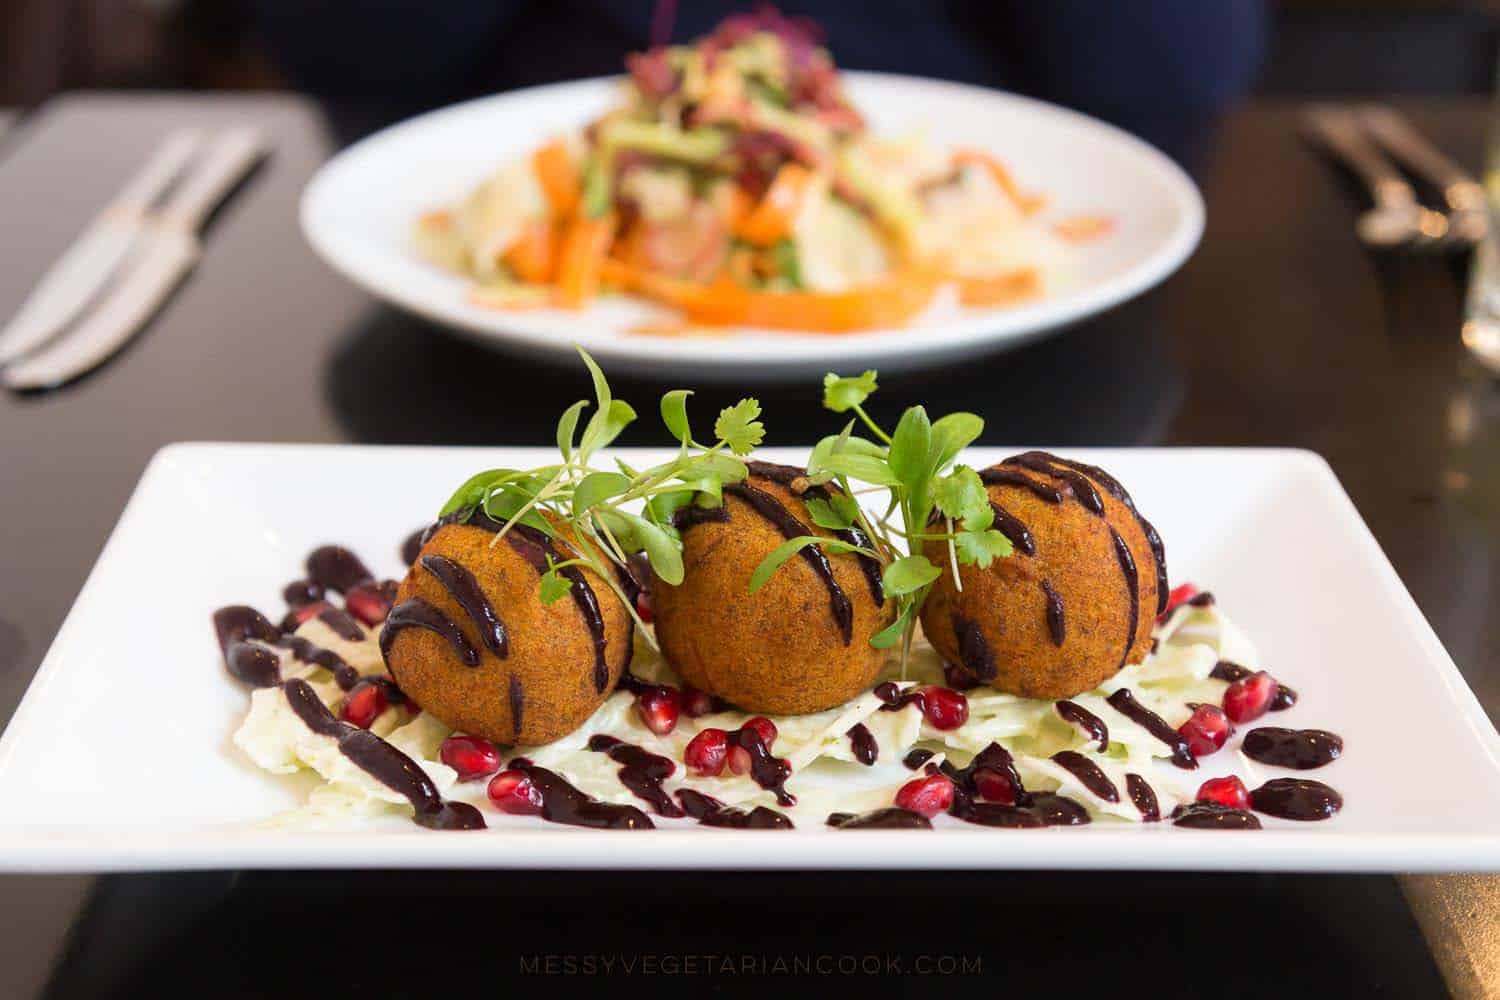 Plantain fritters filled with carrot, sultanas, mint and pine nuts served with chipotle and blueberry sauce and crispy fennel and pomegranate salad.